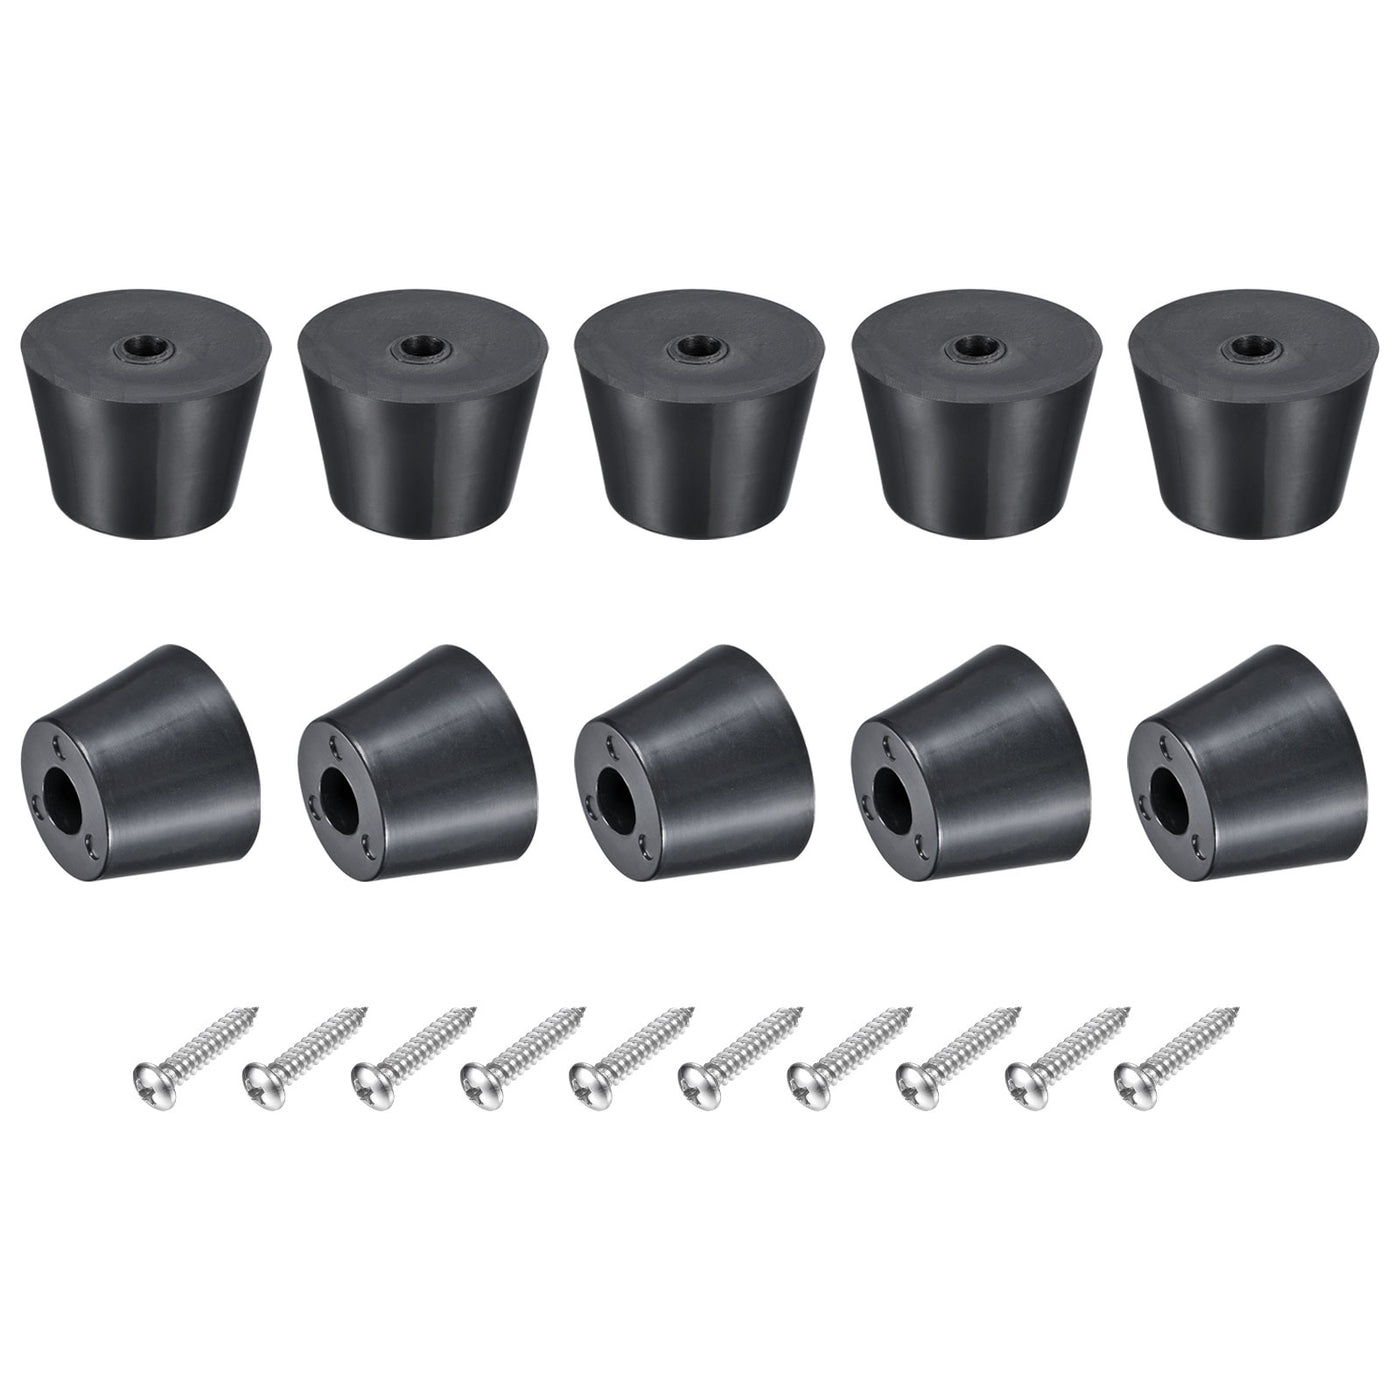 uxcell Uxcell Rubber Bumper Feet, 0.79" H x 1.14" W Round Pads with Stainless Steel Washer and Screws for Furniture, Appliances, Electronics 12 Pcs